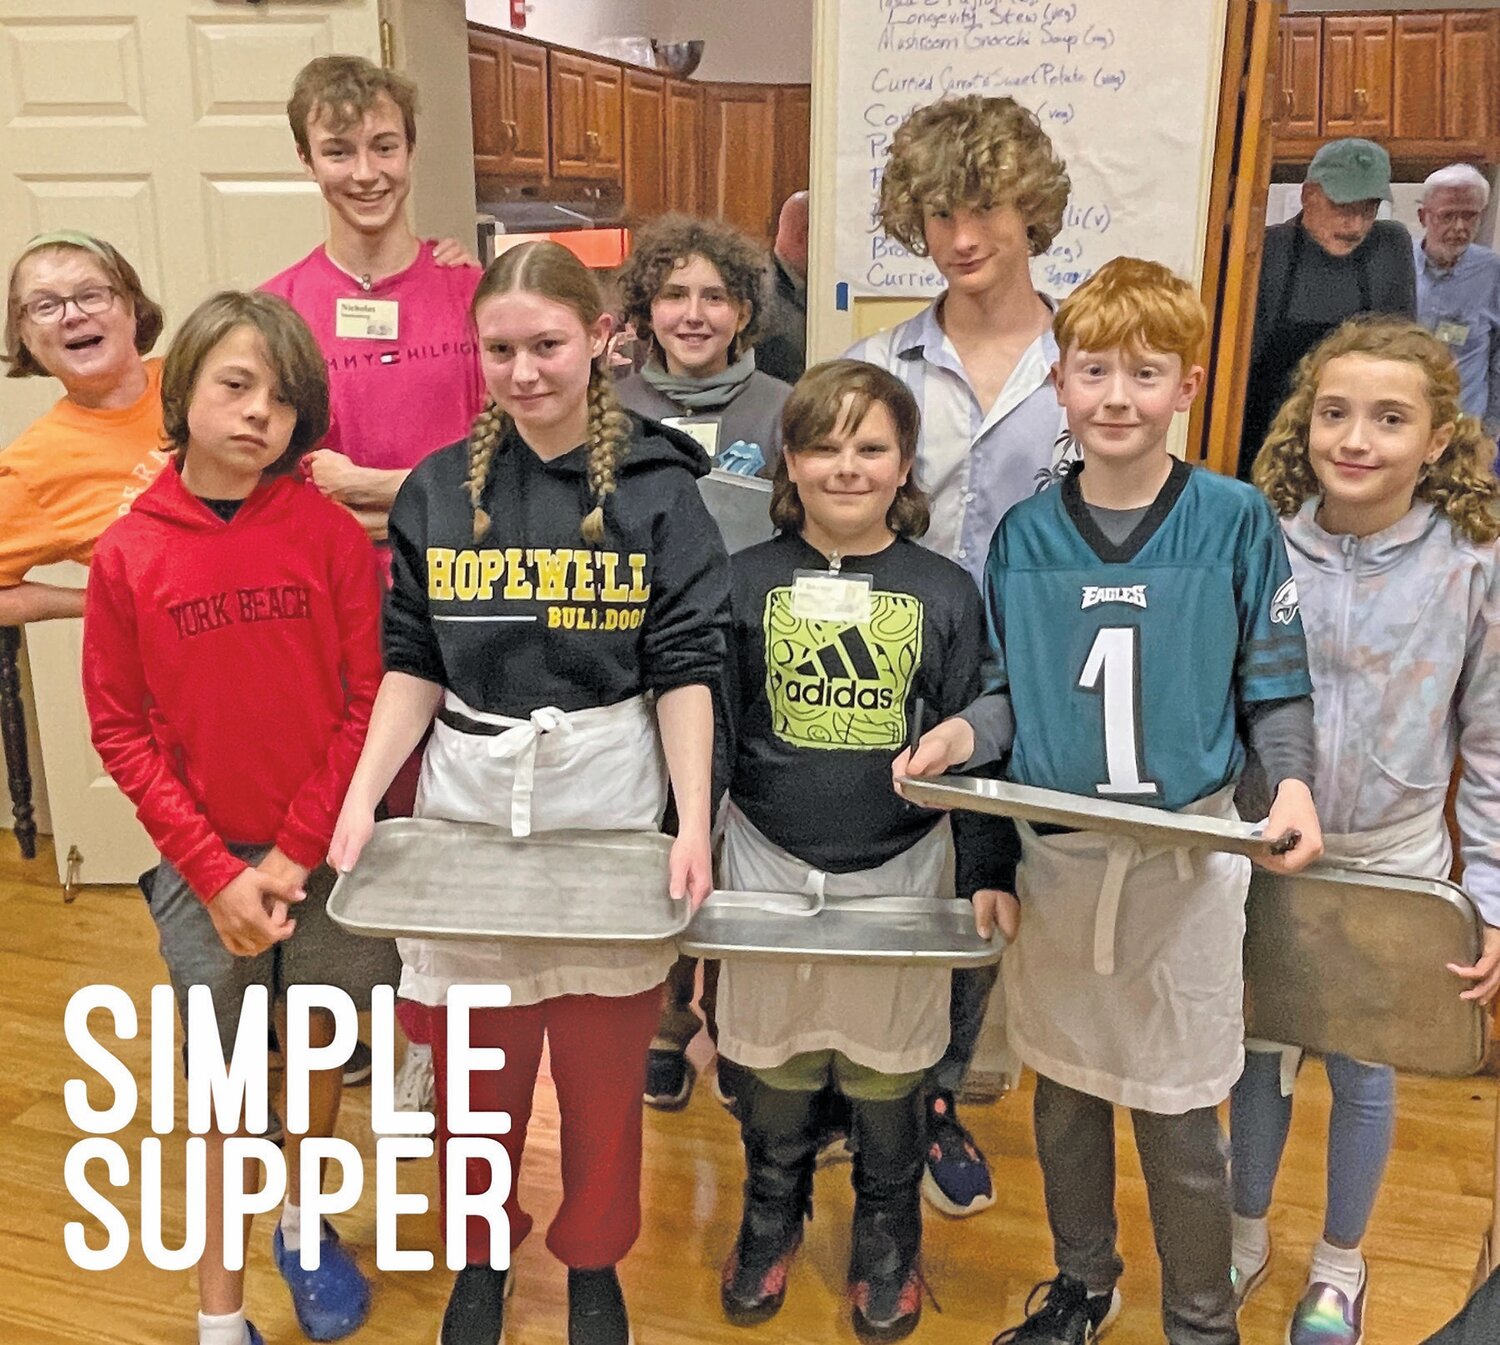 Quaker Kids, from left, back row, are Cynthia and Nick Vandenberg, Miska Torres, and Nate Sherwin; and front row, Ned and Sarah Armour, Charles Forte, and Jack and Lydia Ciccimaro.